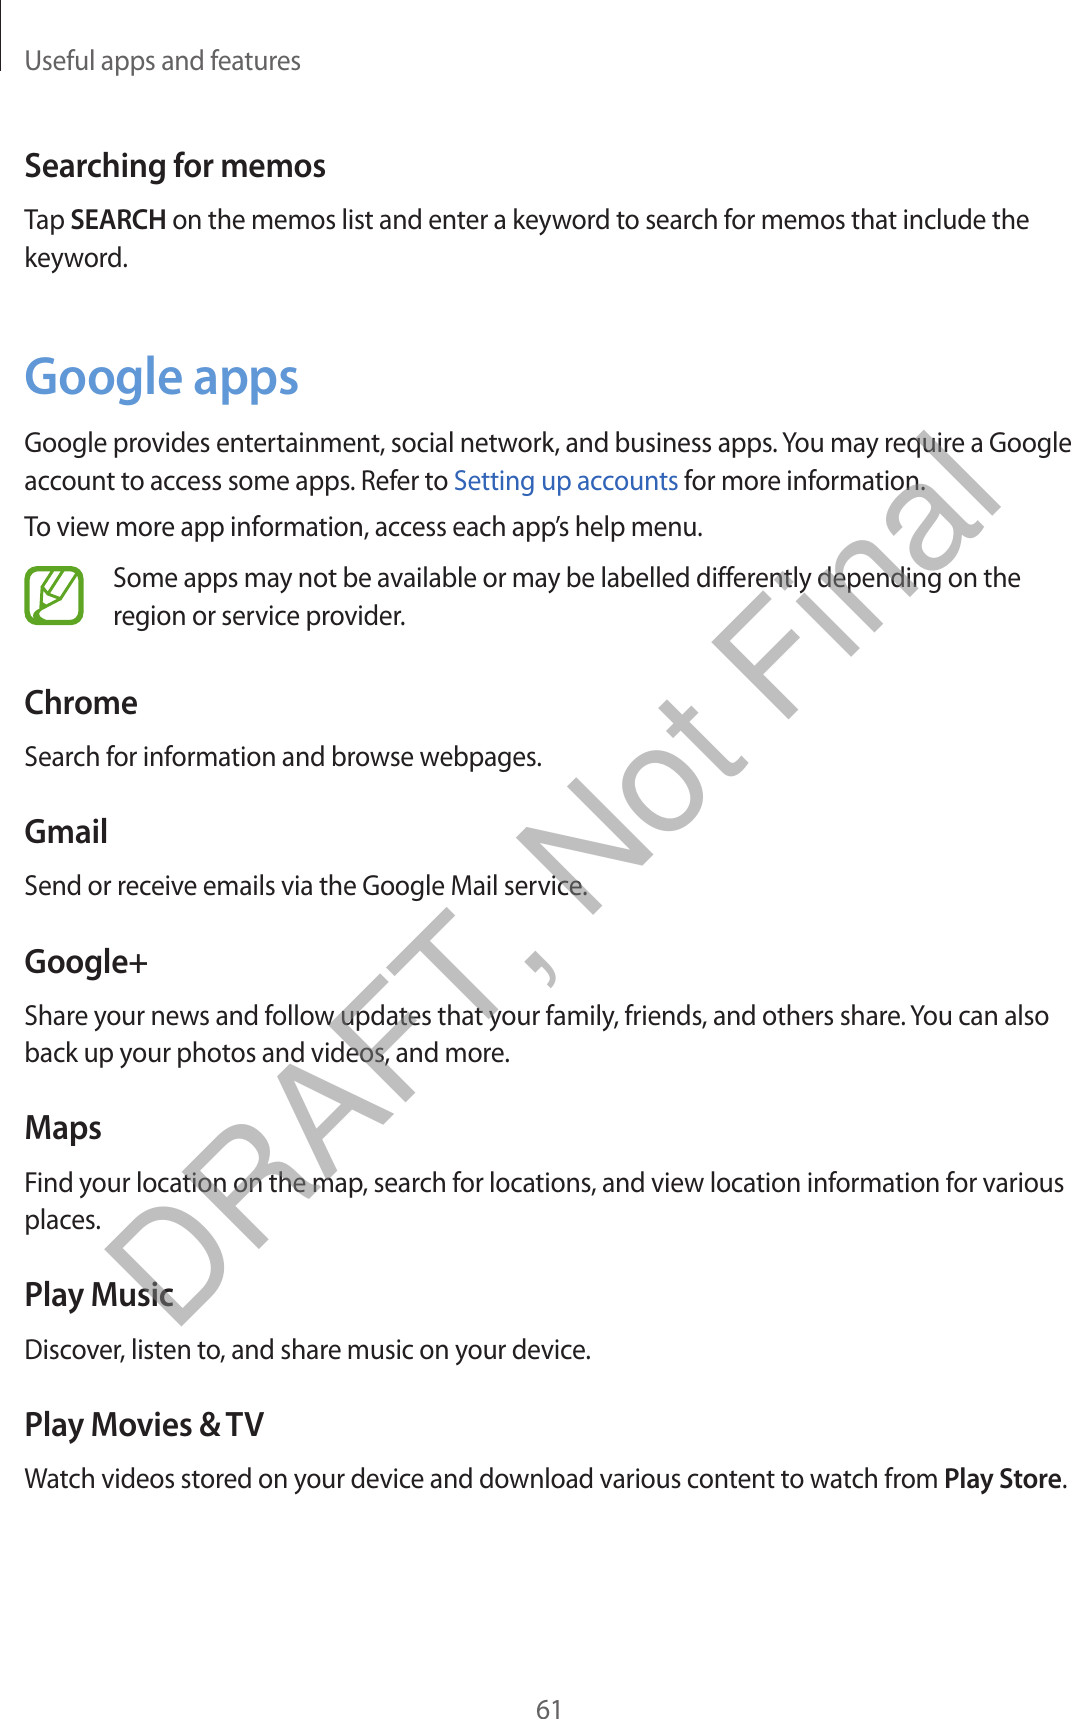 Useful apps and features61Searching for memosTap SEARCH on the memos list and enter a keyword to search for memos that include the keyword.Google appsGoogle provides entertainment, social network, and business apps. You may require a Google account to access some apps. Refer to Setting up accounts for more information.To view more app information, access each app’s help menu.Some apps may not be available or may be labelled differently depending on the region or service provider.ChromeSearch for information and browse webpages.GmailSend or receive emails via the Google Mail service.Google+Share your news and follow updates that your family, friends, and others share. You can also back up your photos and videos, and more.MapsFind your location on the map, search for locations, and view location information for various places.Play MusicDiscover, listen to, and share music on your device.Play Movies &amp; TVWatch videos stored on your device and download various content to watch from Play Store.DRAFT, Not Final